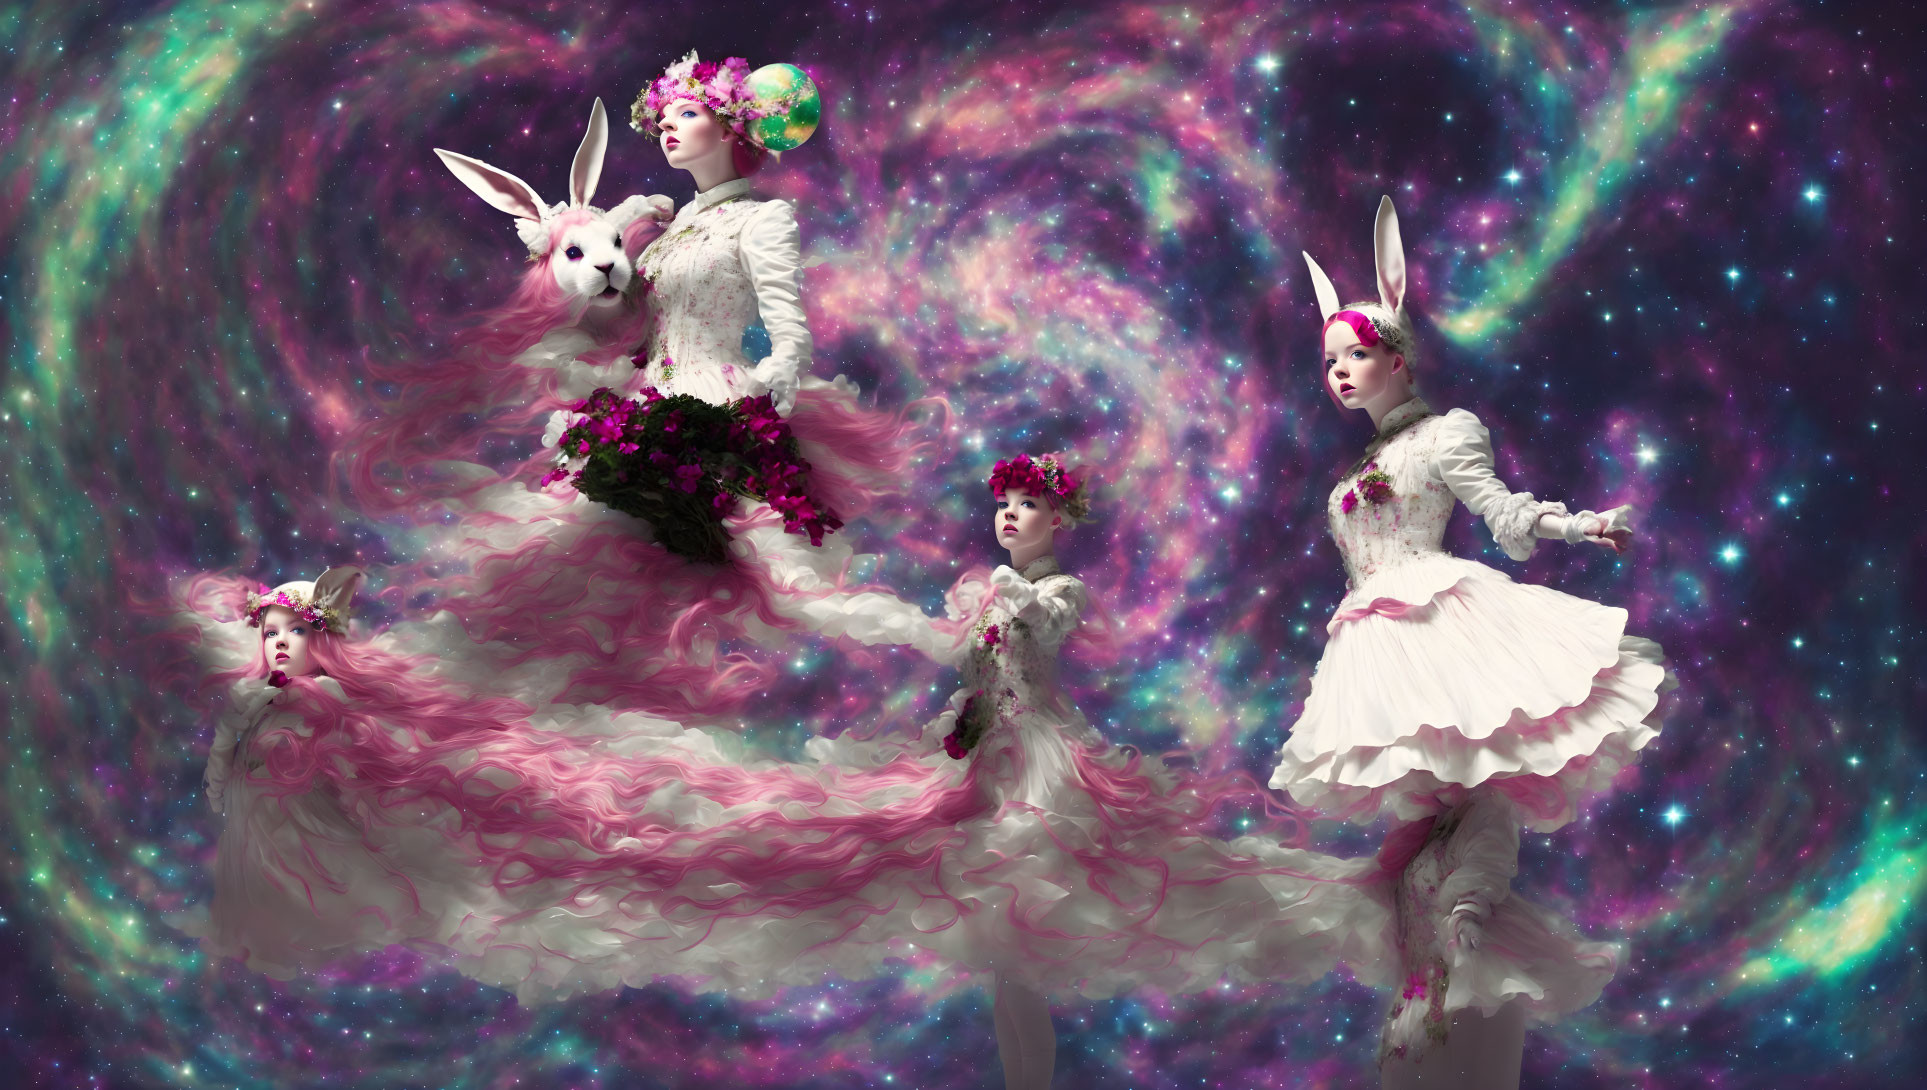 Four ethereal rabbit-like figures in white attire against cosmic backdrop